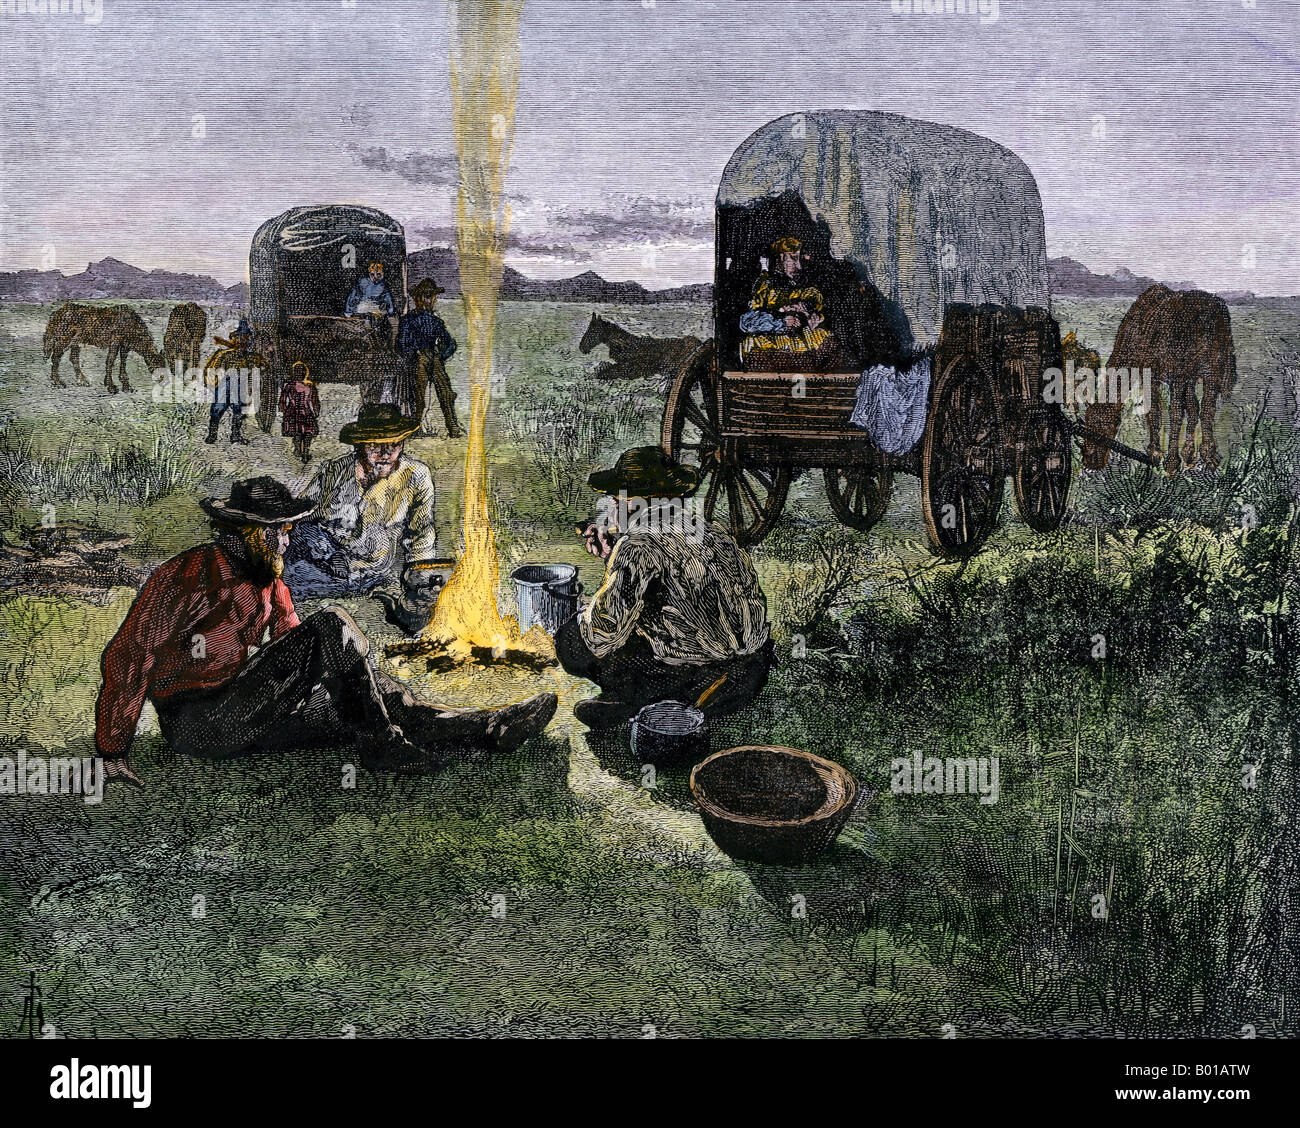 Santa Fe Trail pioneers around a campfire on their way west. Hand-colored woodcut Stock Photo